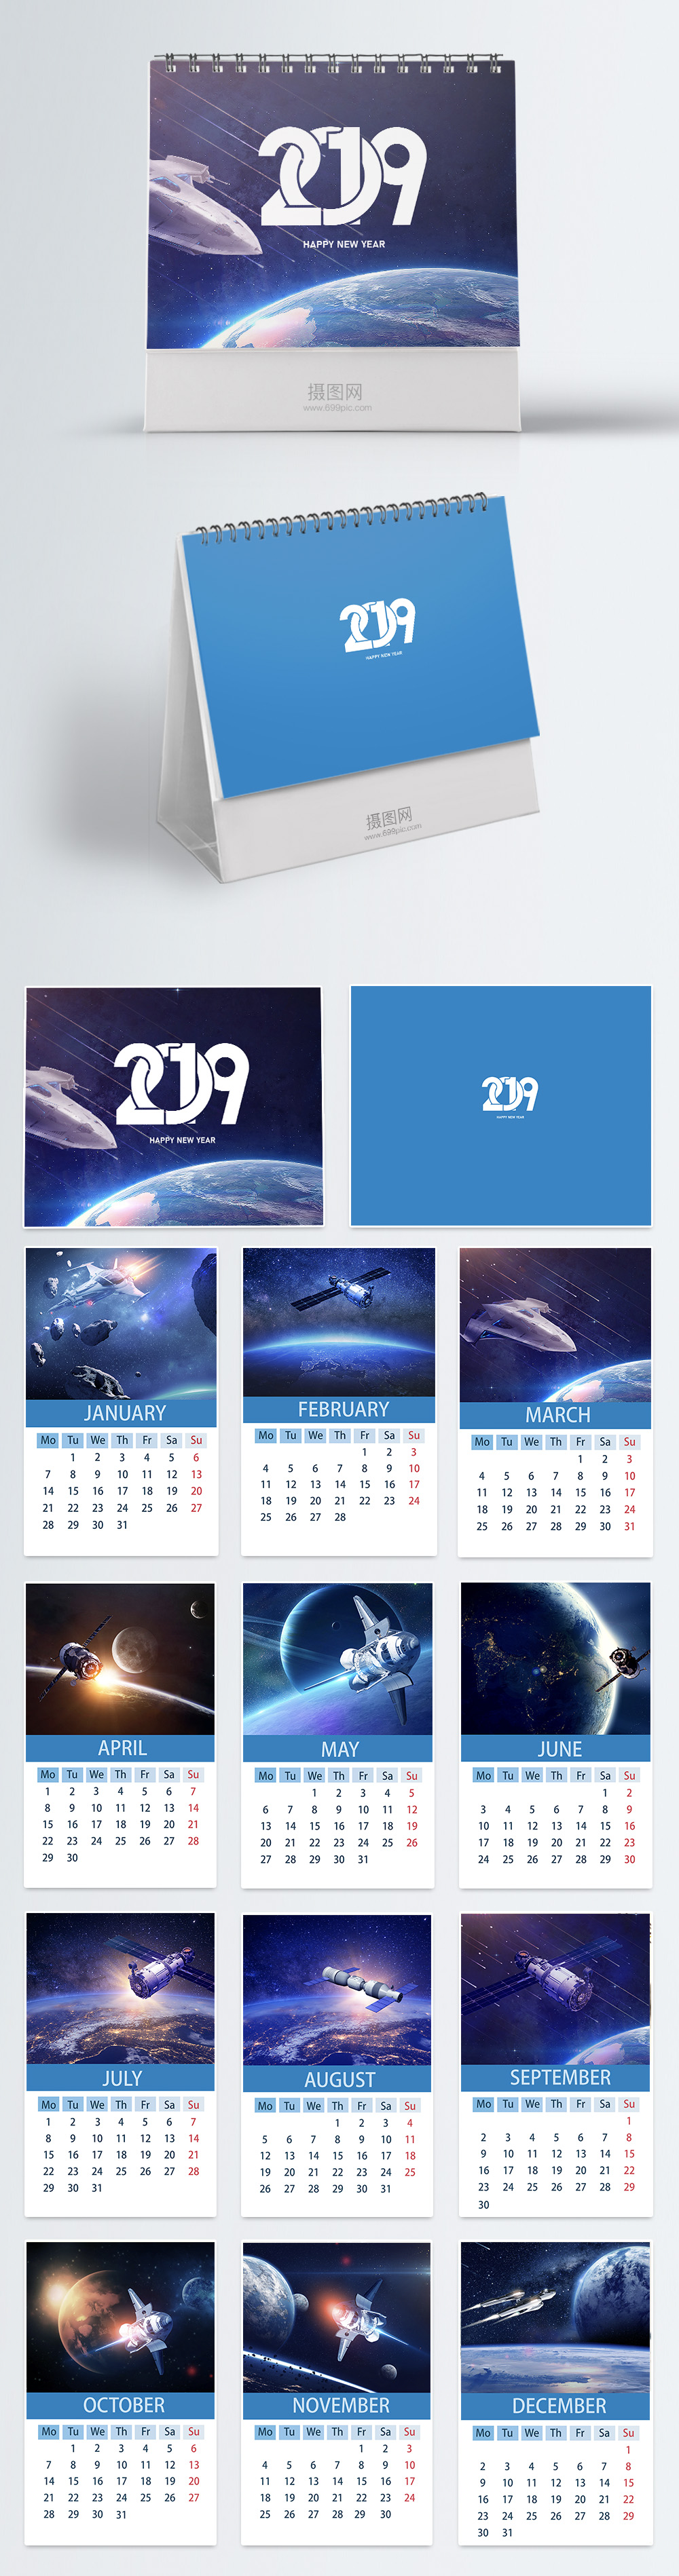 Space travel calendar 2019 template image_picture free download